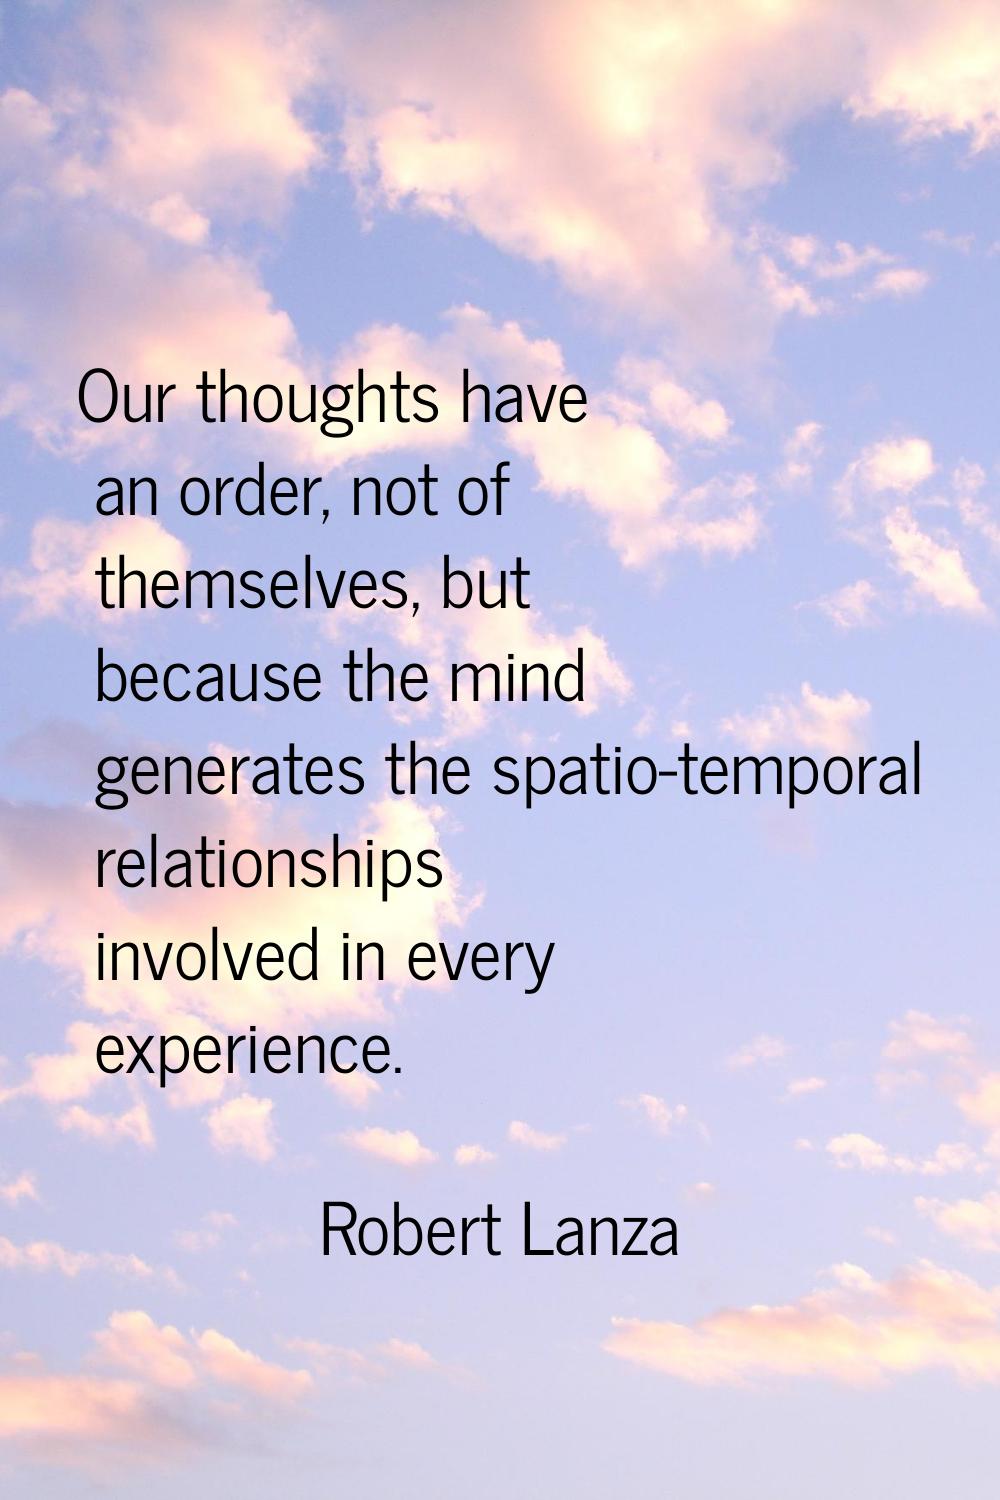 Our thoughts have an order, not of themselves, but because the mind generates the spatio-temporal r